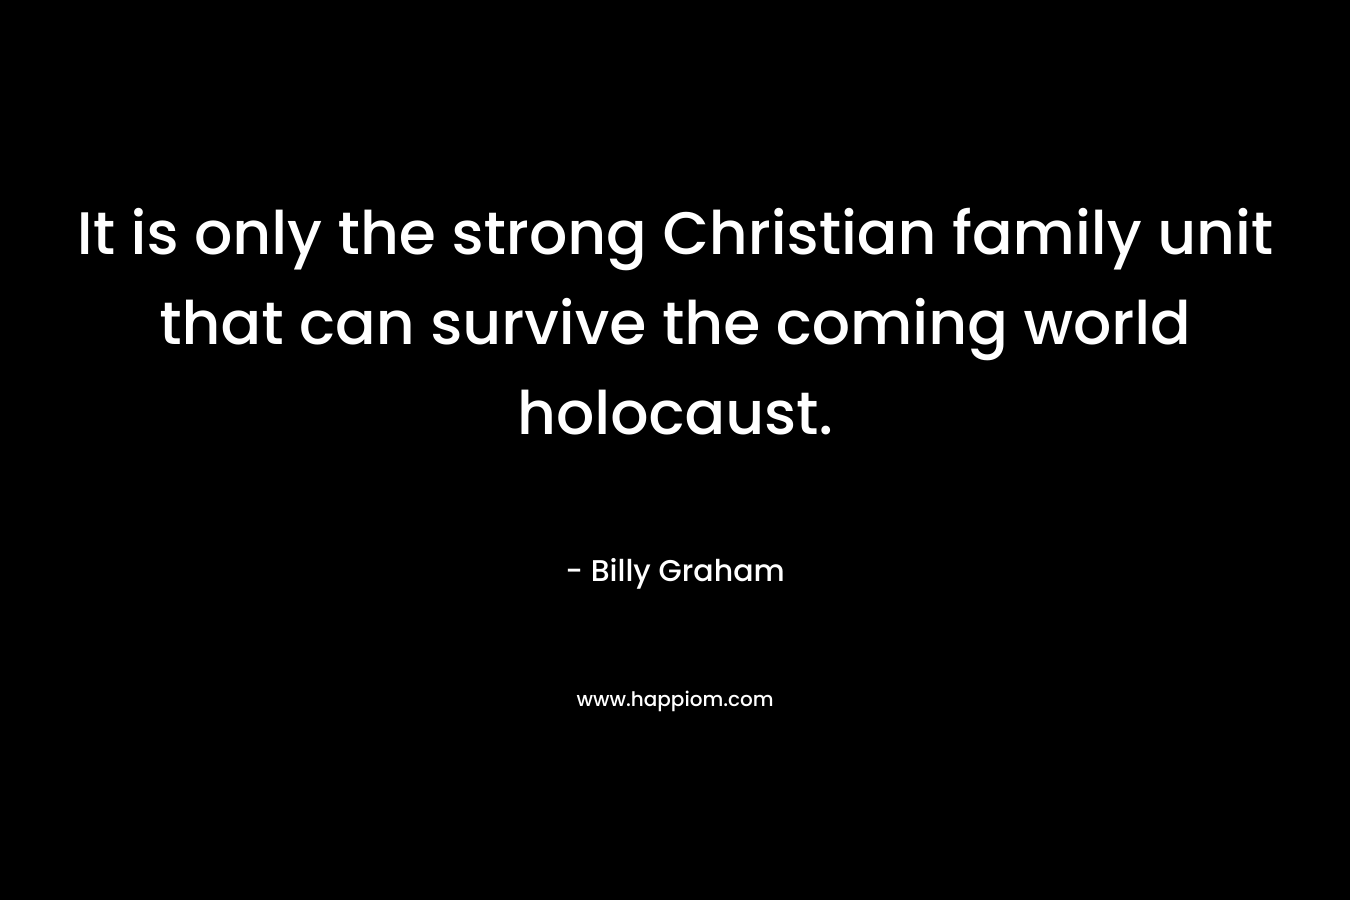 It is only the strong Christian family unit that can survive the coming world holocaust. – Billy Graham